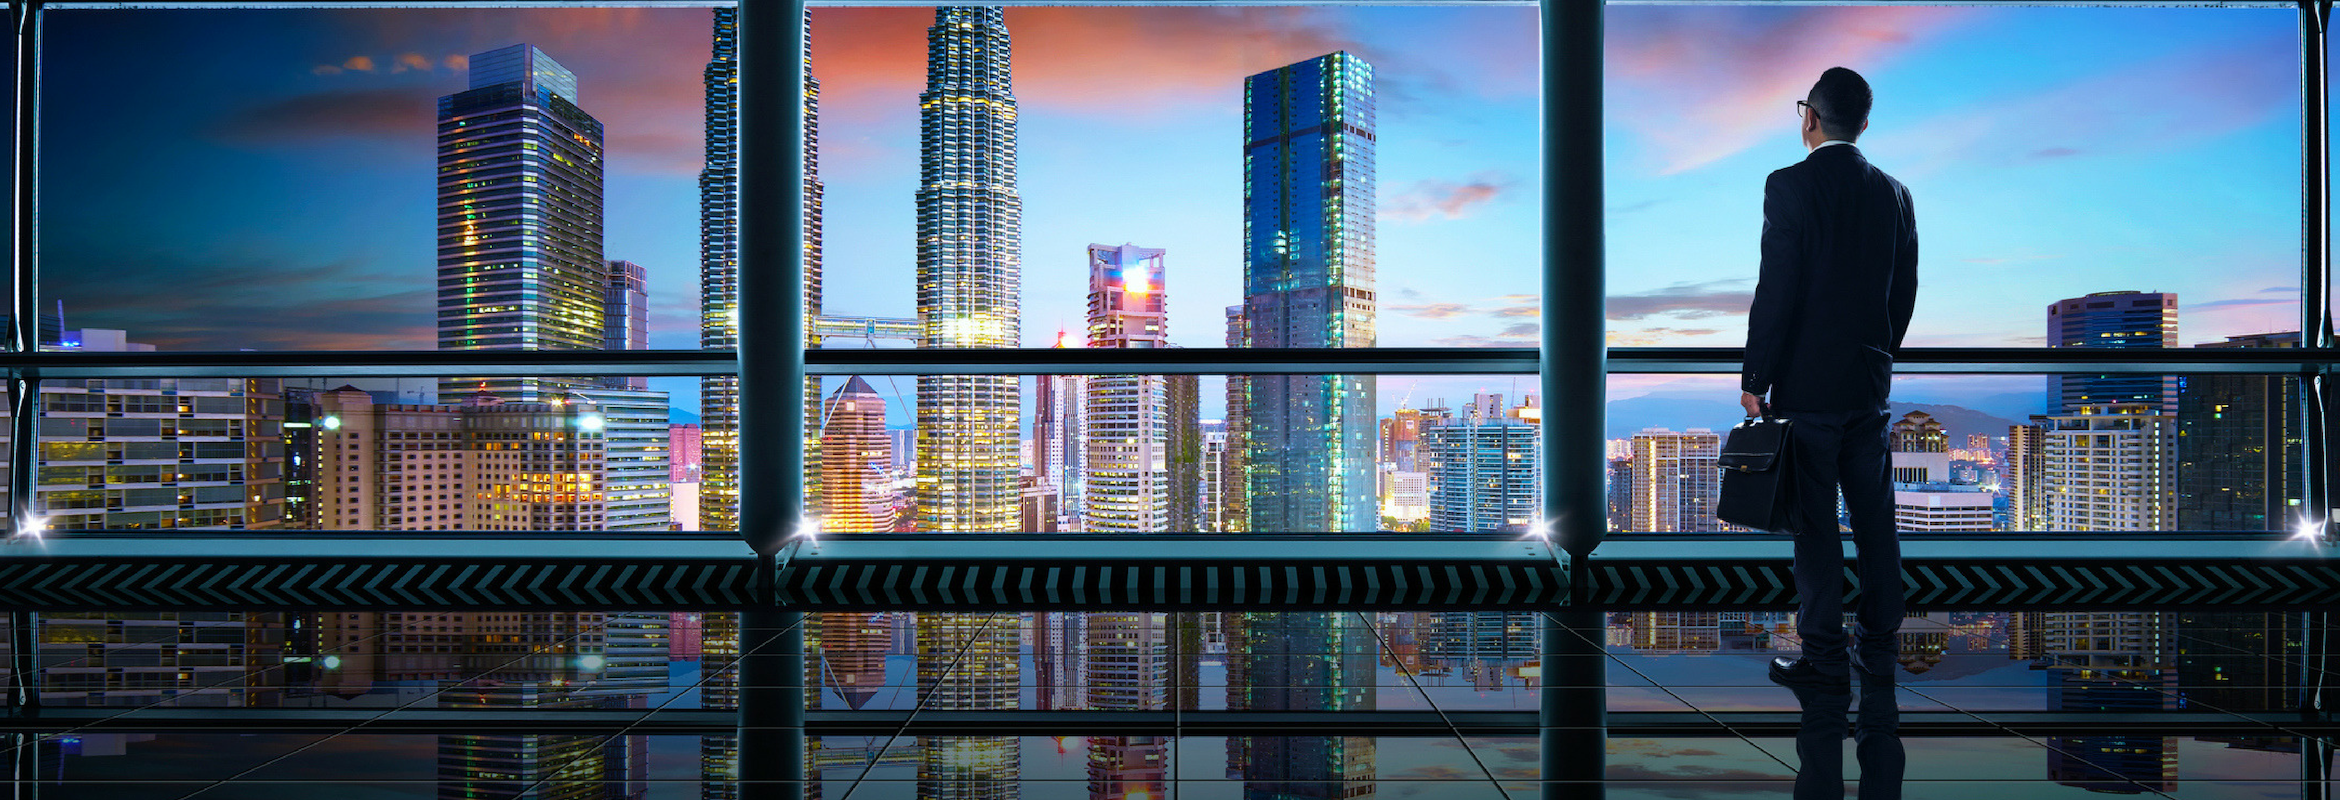 An image of a man in a high rise building look out over the city horizon.